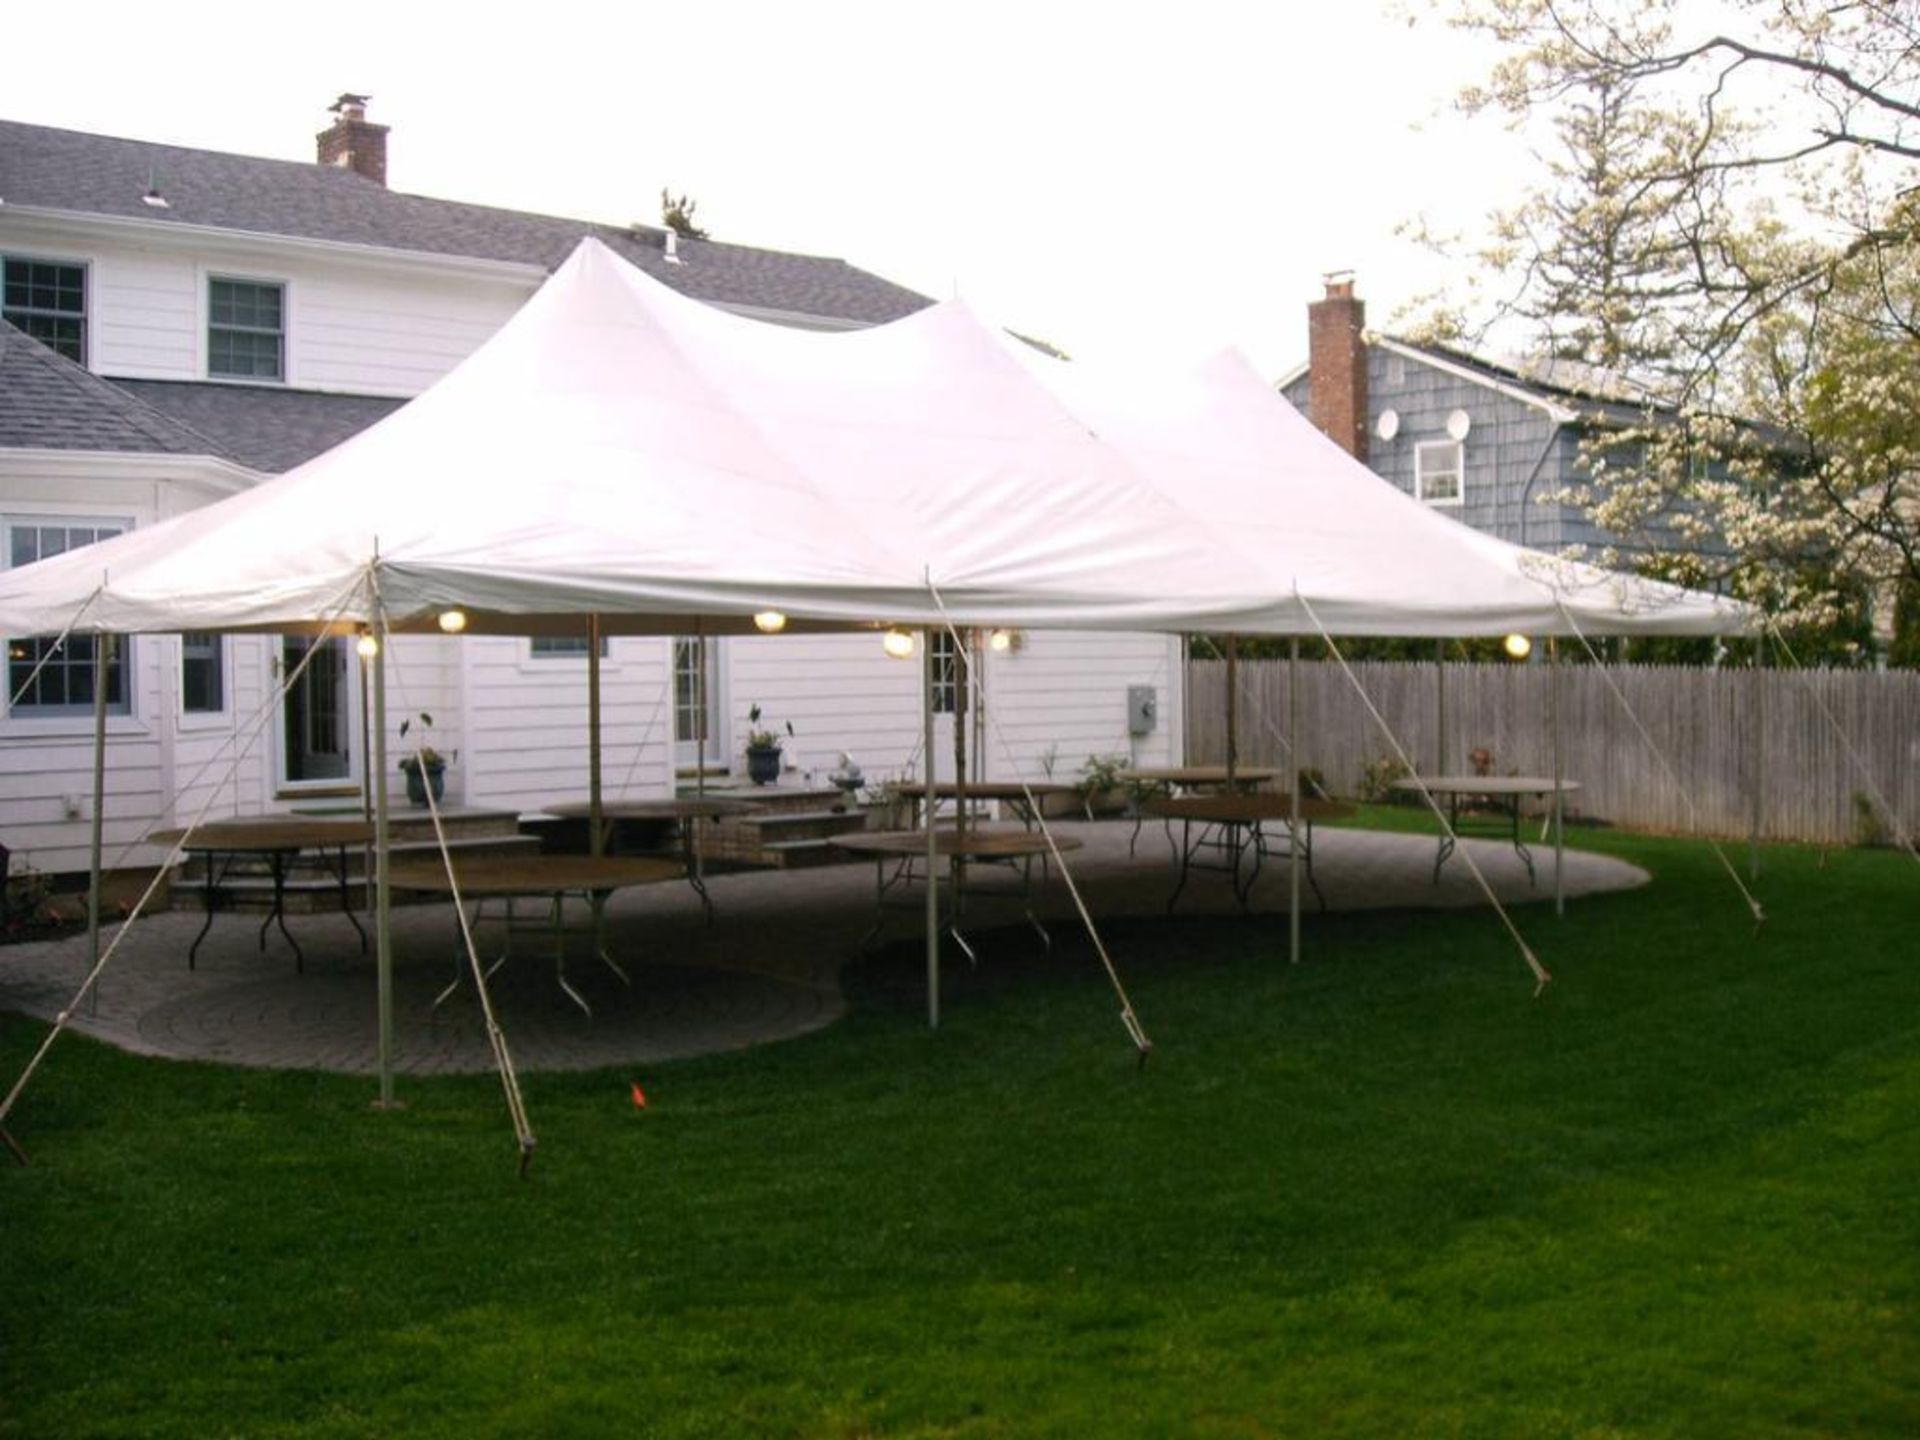 LOT: Eureka 20' x 40' White Canopy, (36) Poles, (16) Stakes (THE PICTURE OF THE SET UP TENT/CANOPY A